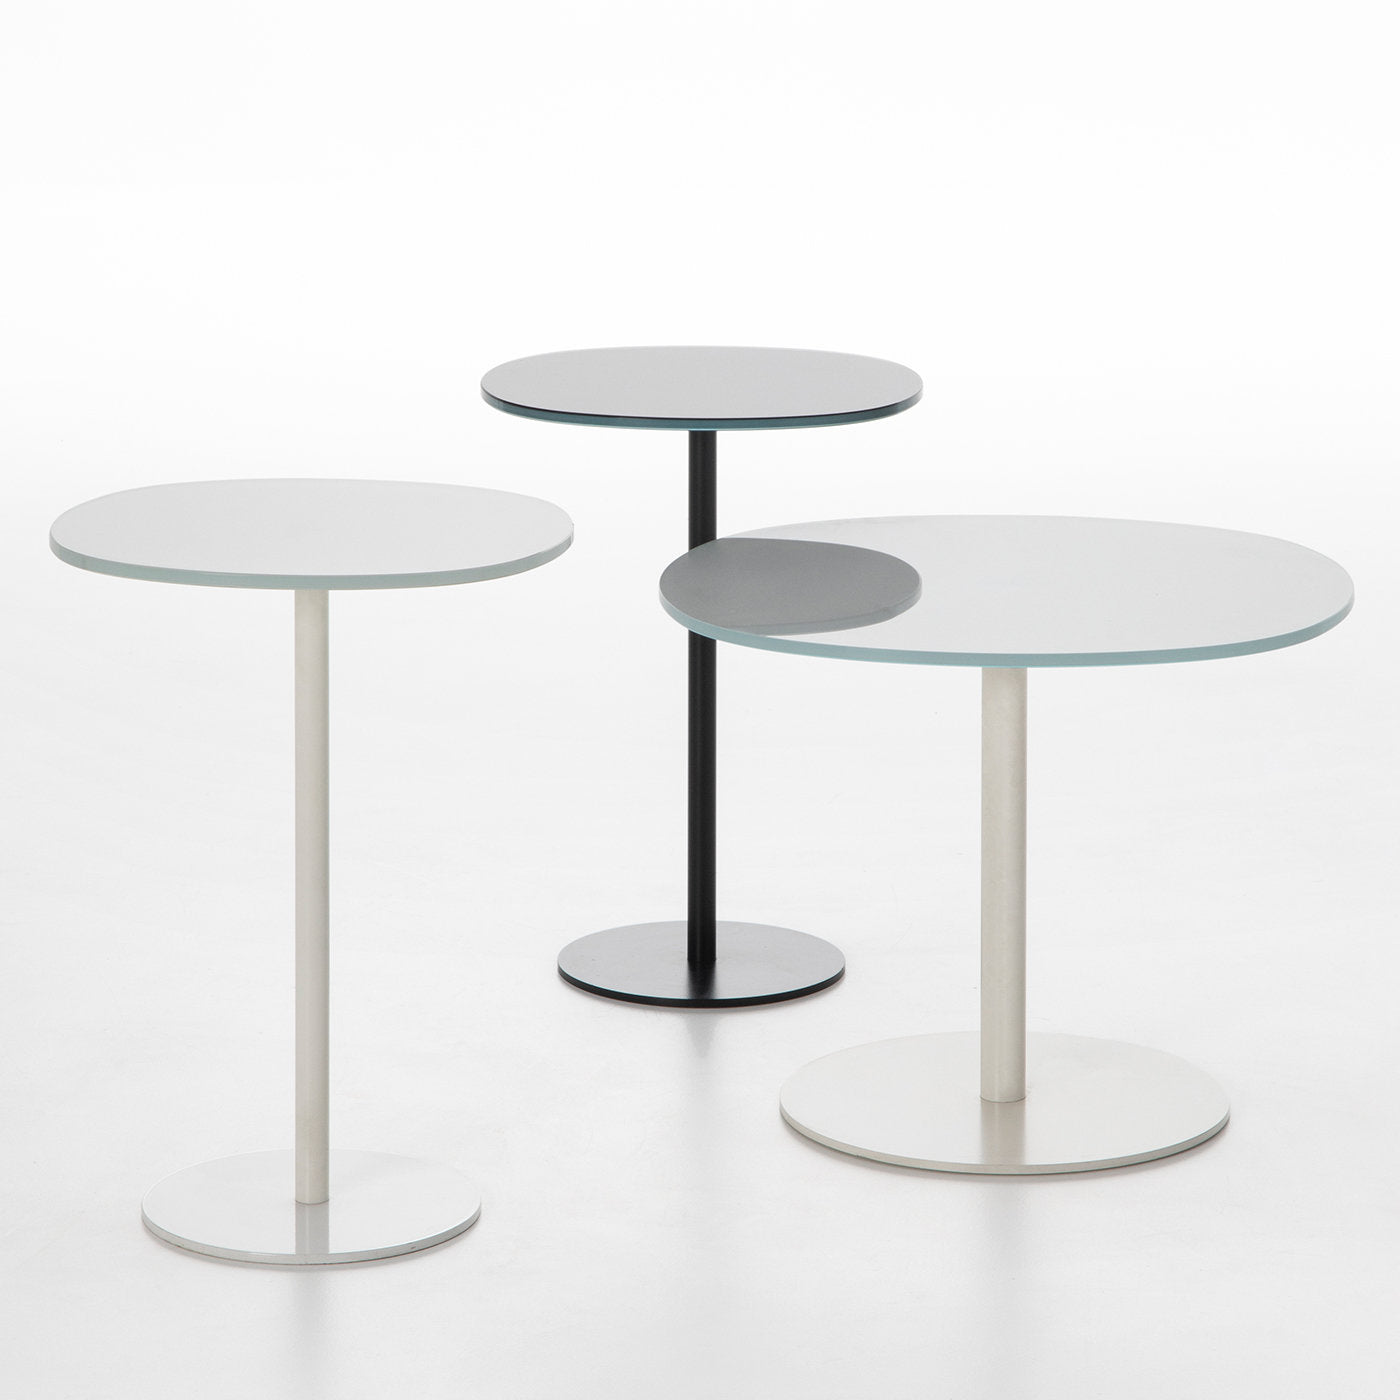 Solenoide White Tall Side Table by Piero Lissoni - Alternative view 1